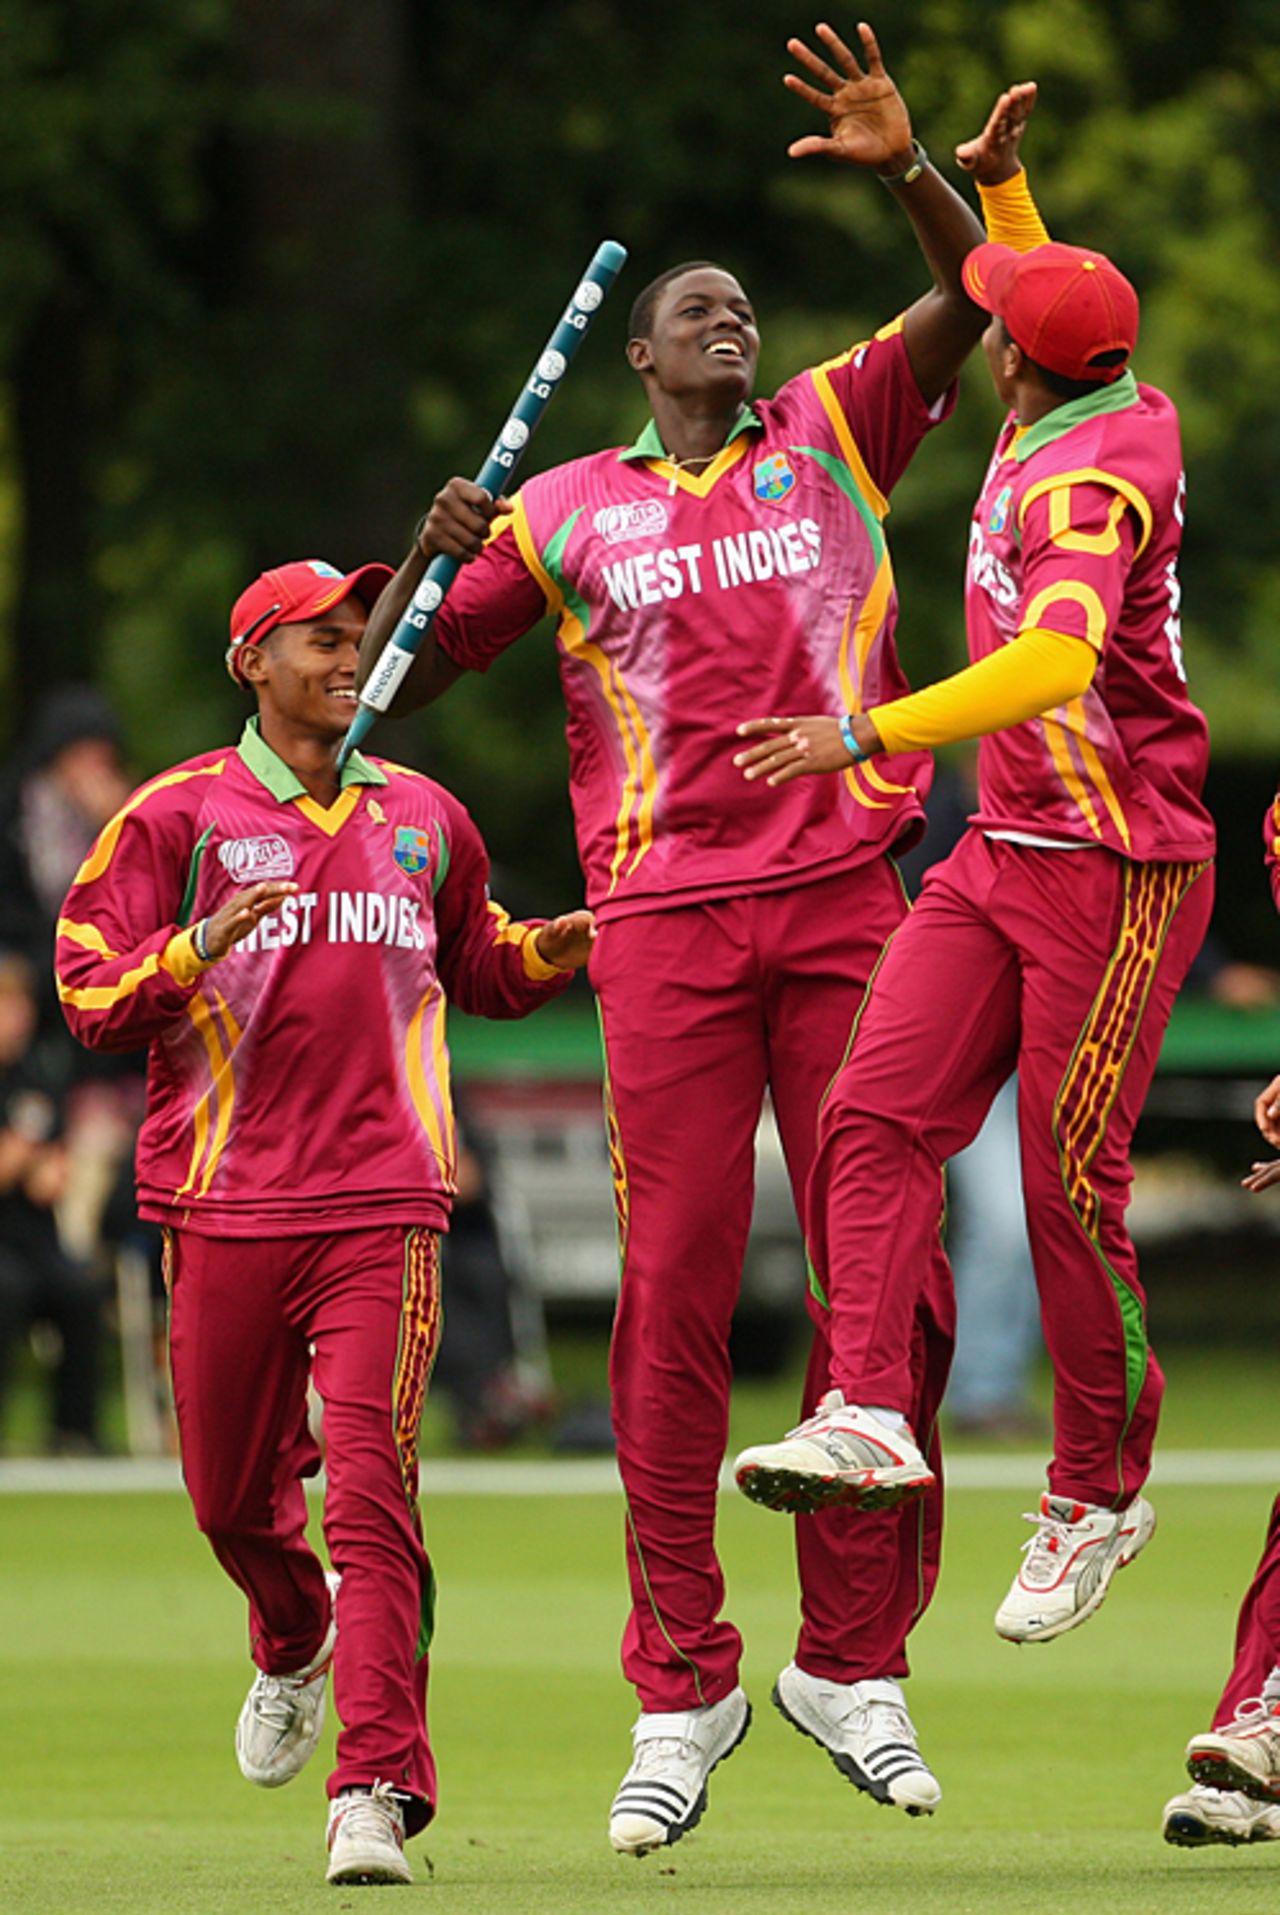 Jason Holder's five wickets sealed West Indies' progression, England v West Indies, Quarter-final, ICC Under-19 World Cup, Rangiora, January 23, 2010